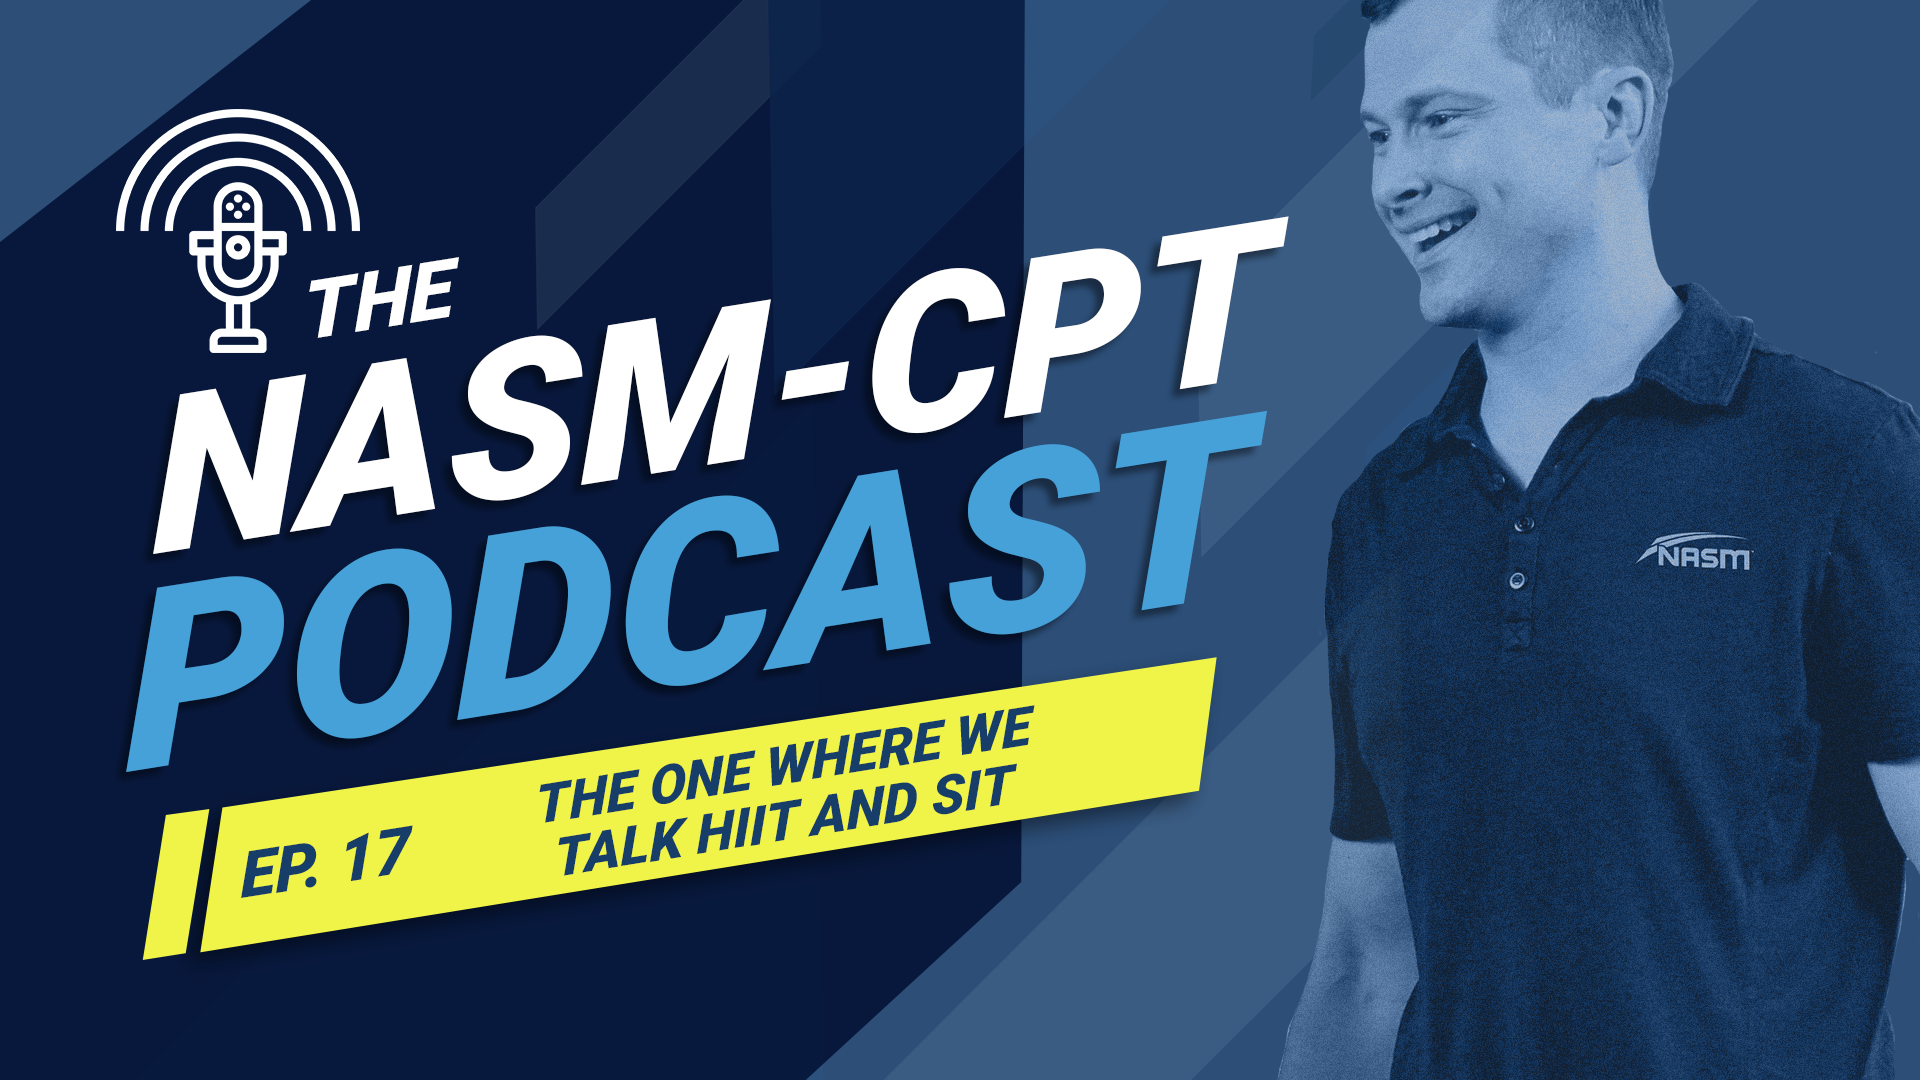 The 150store-CPT Podcast: The One Where We Talk HIIT and SIT